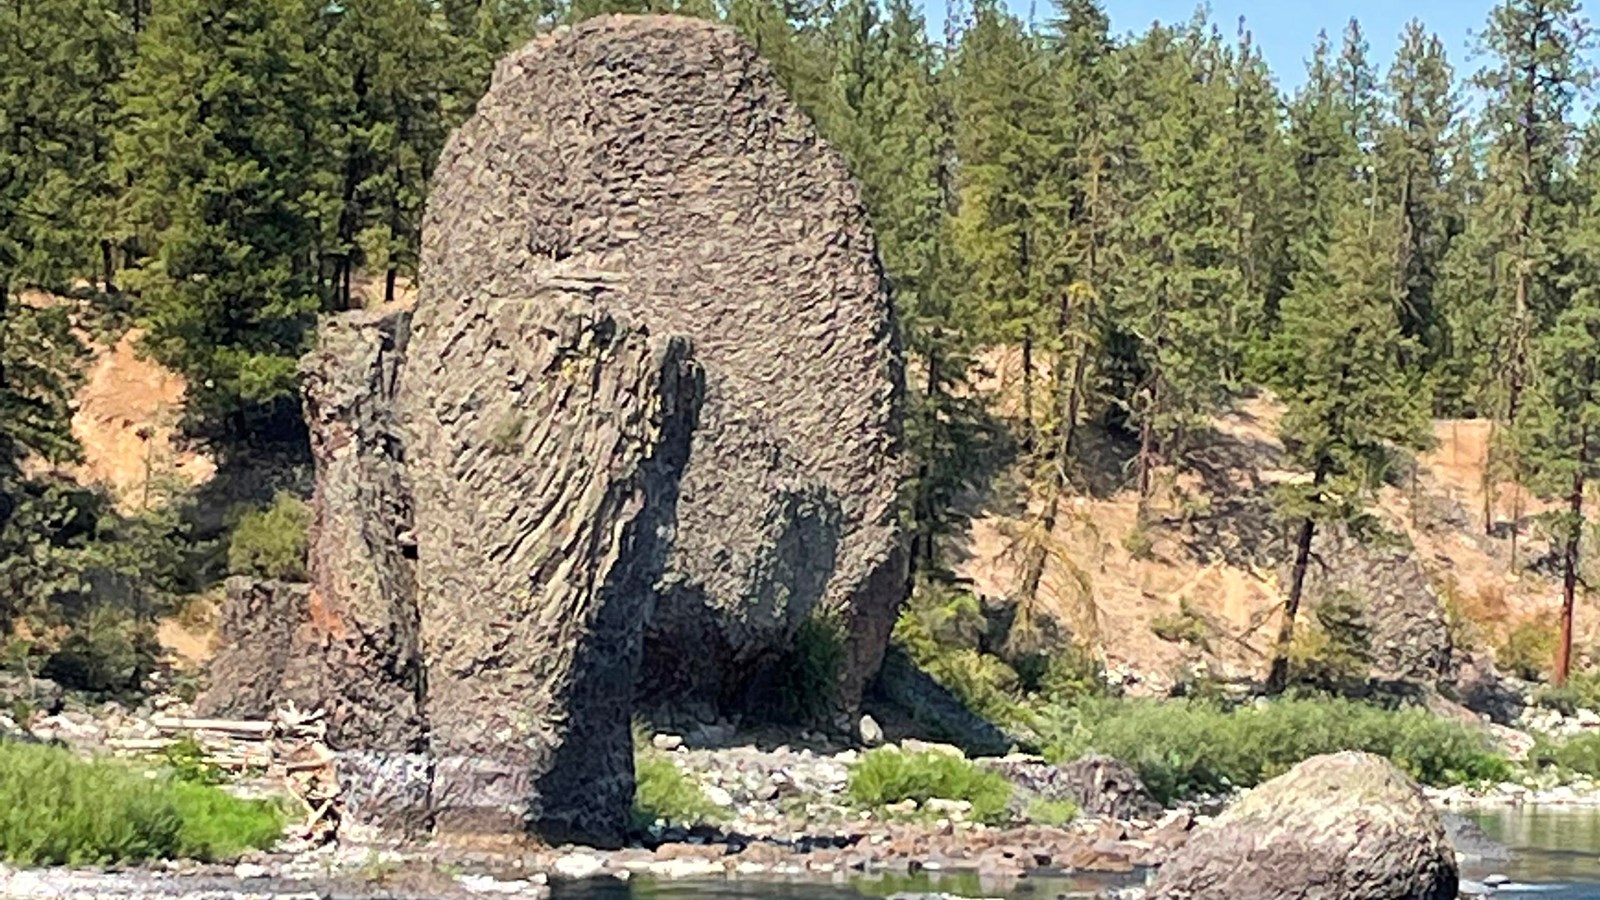 Image of two large (two story tall) basalt rocks next to a stream